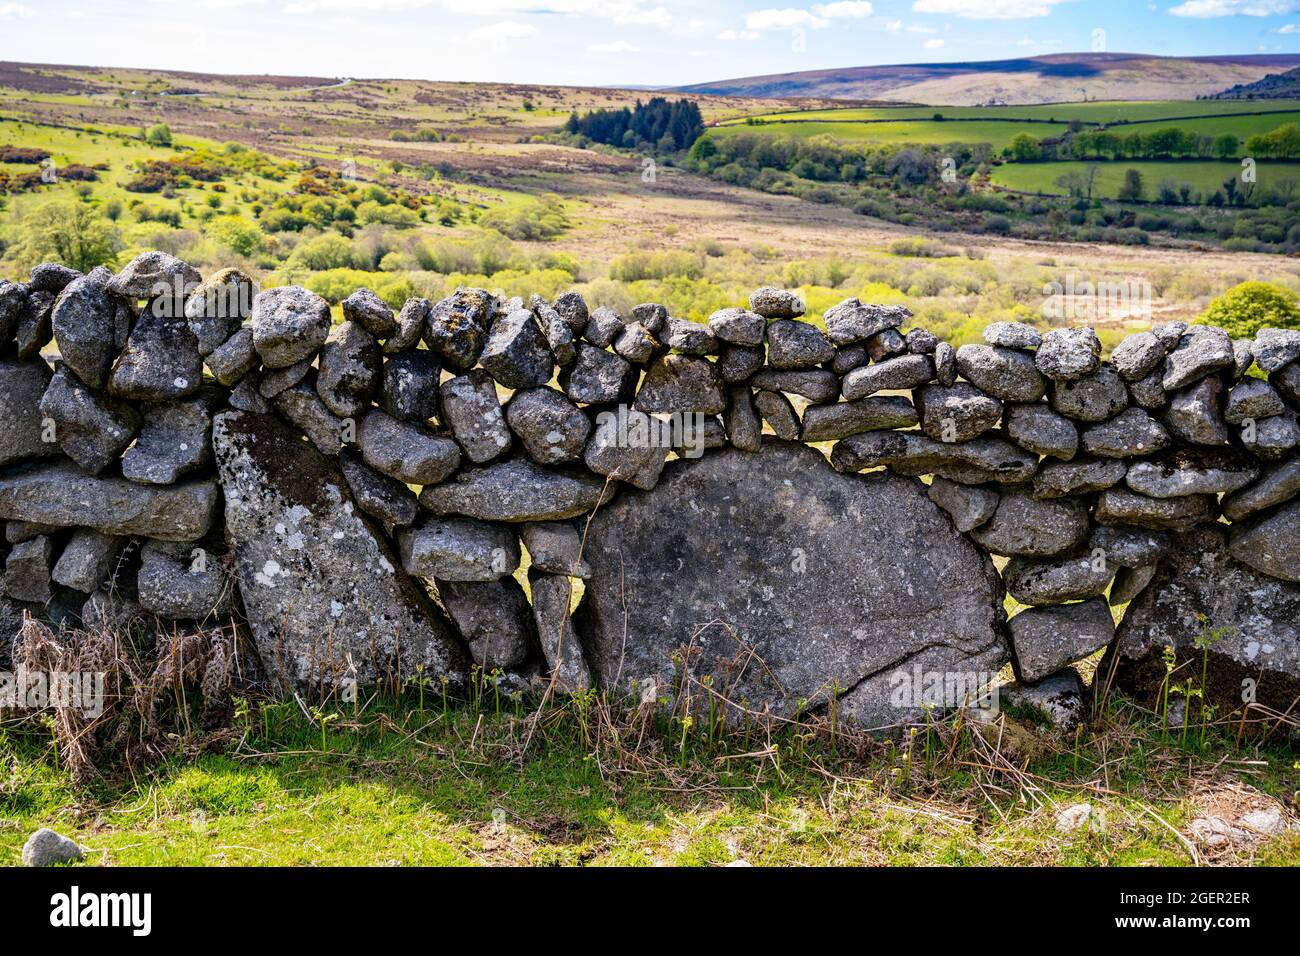 A drystone wall at the former Emsworthy Farm is built from a curious mixture of large and small granite boulders.  Dartmoor National Park, Devon, UK. Stock Photo